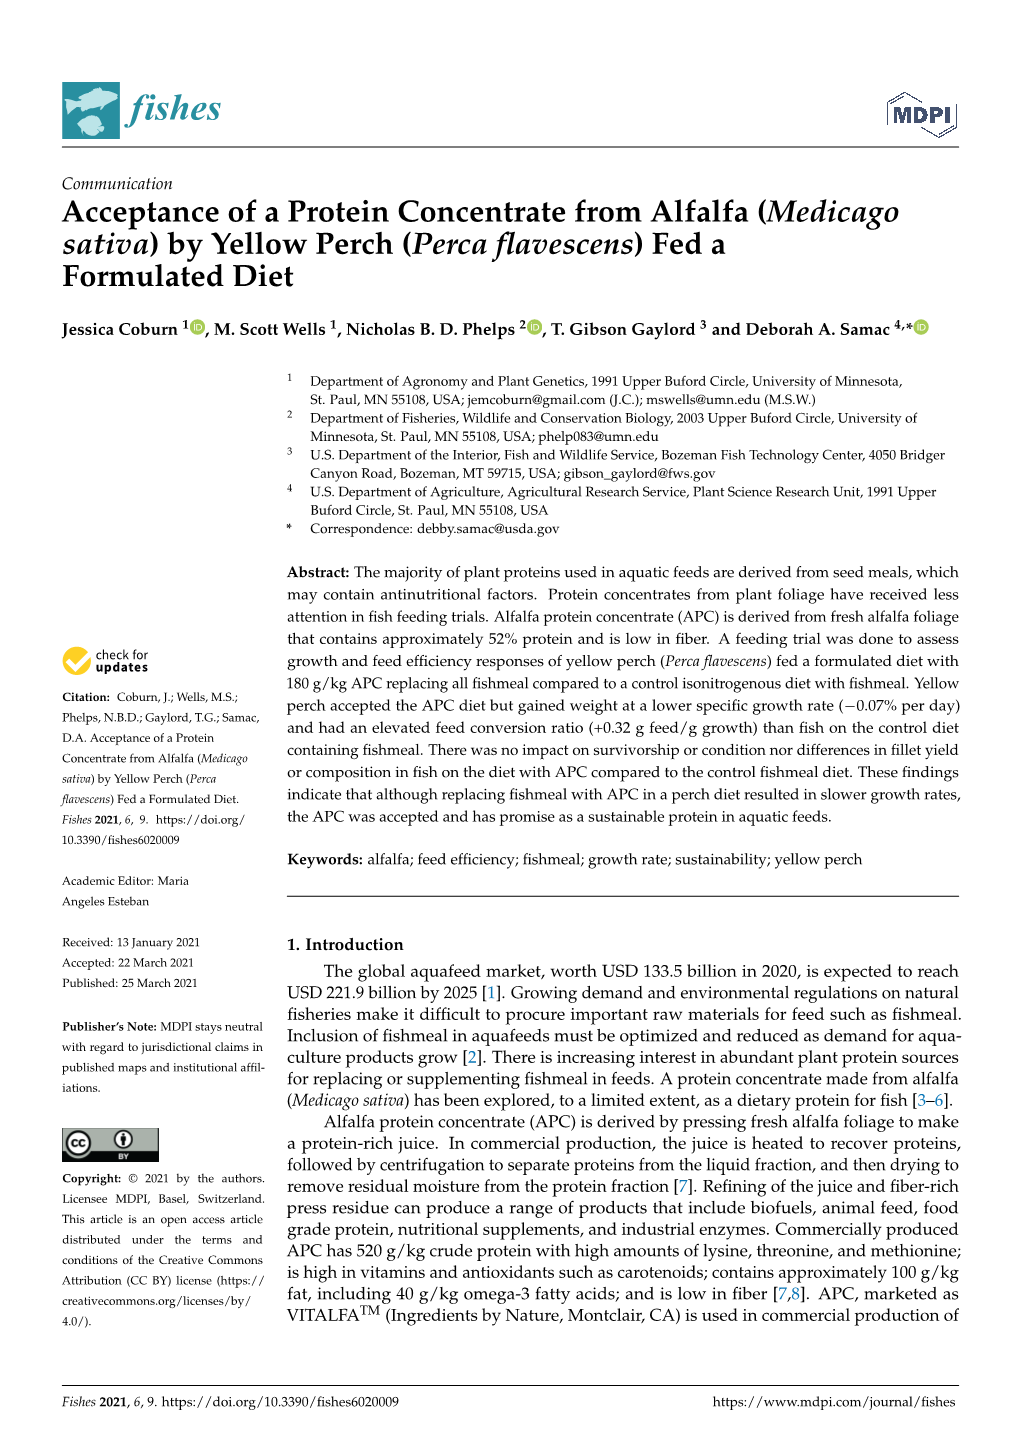 Acceptance of a Protein Concentrate from Alfalfa (Medicago Sativa) by Yellow Perch (Perca Flavescens) Fed a Formulated Diet